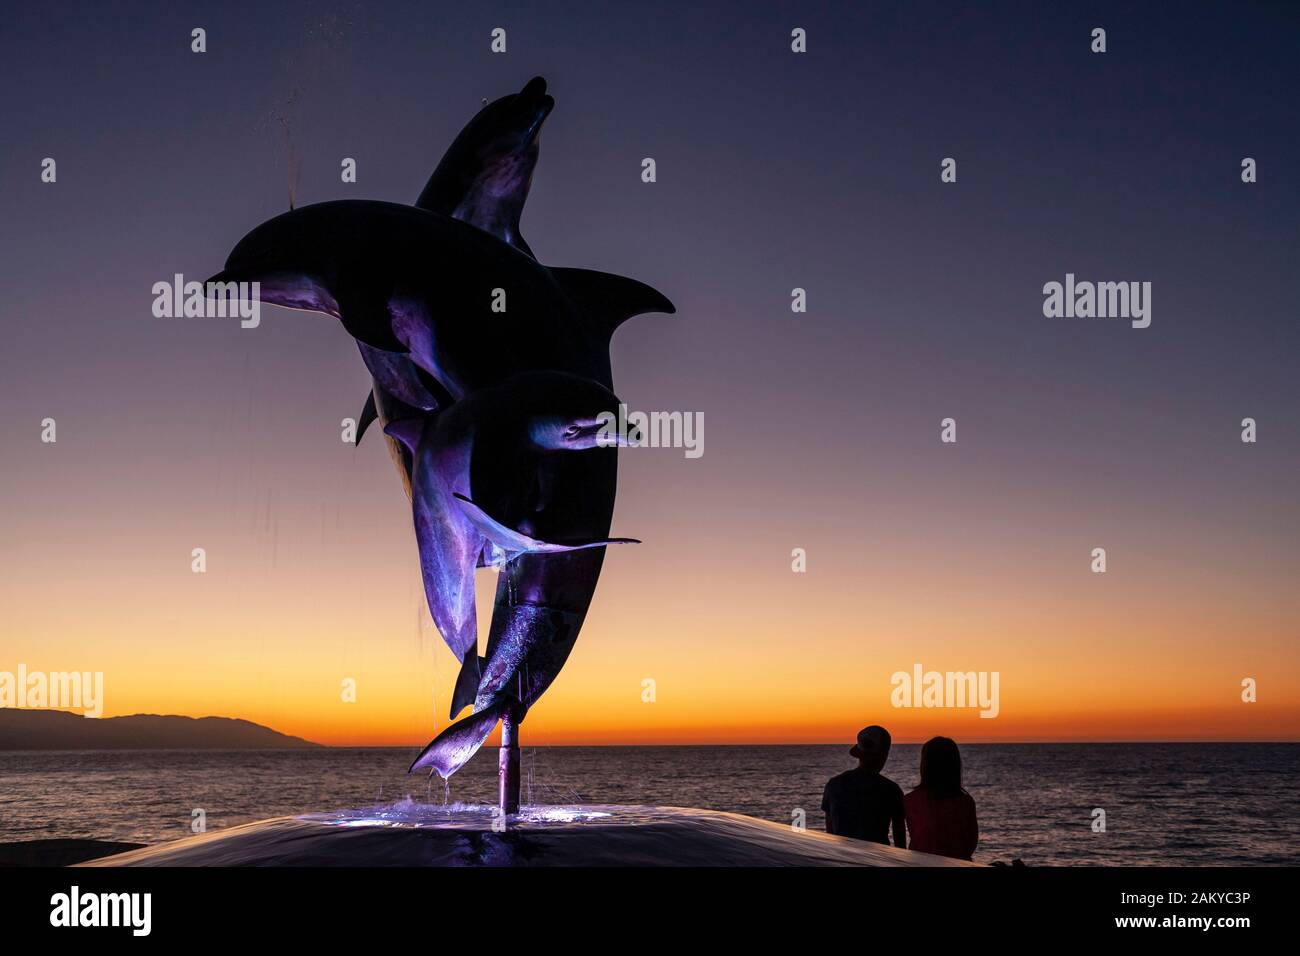 A Couple Sits and looks at the sunset over the ocean by the Friendship Fountain, the famous dolphin statue on the Malecon in Puerto Vallarta. Stock Photo